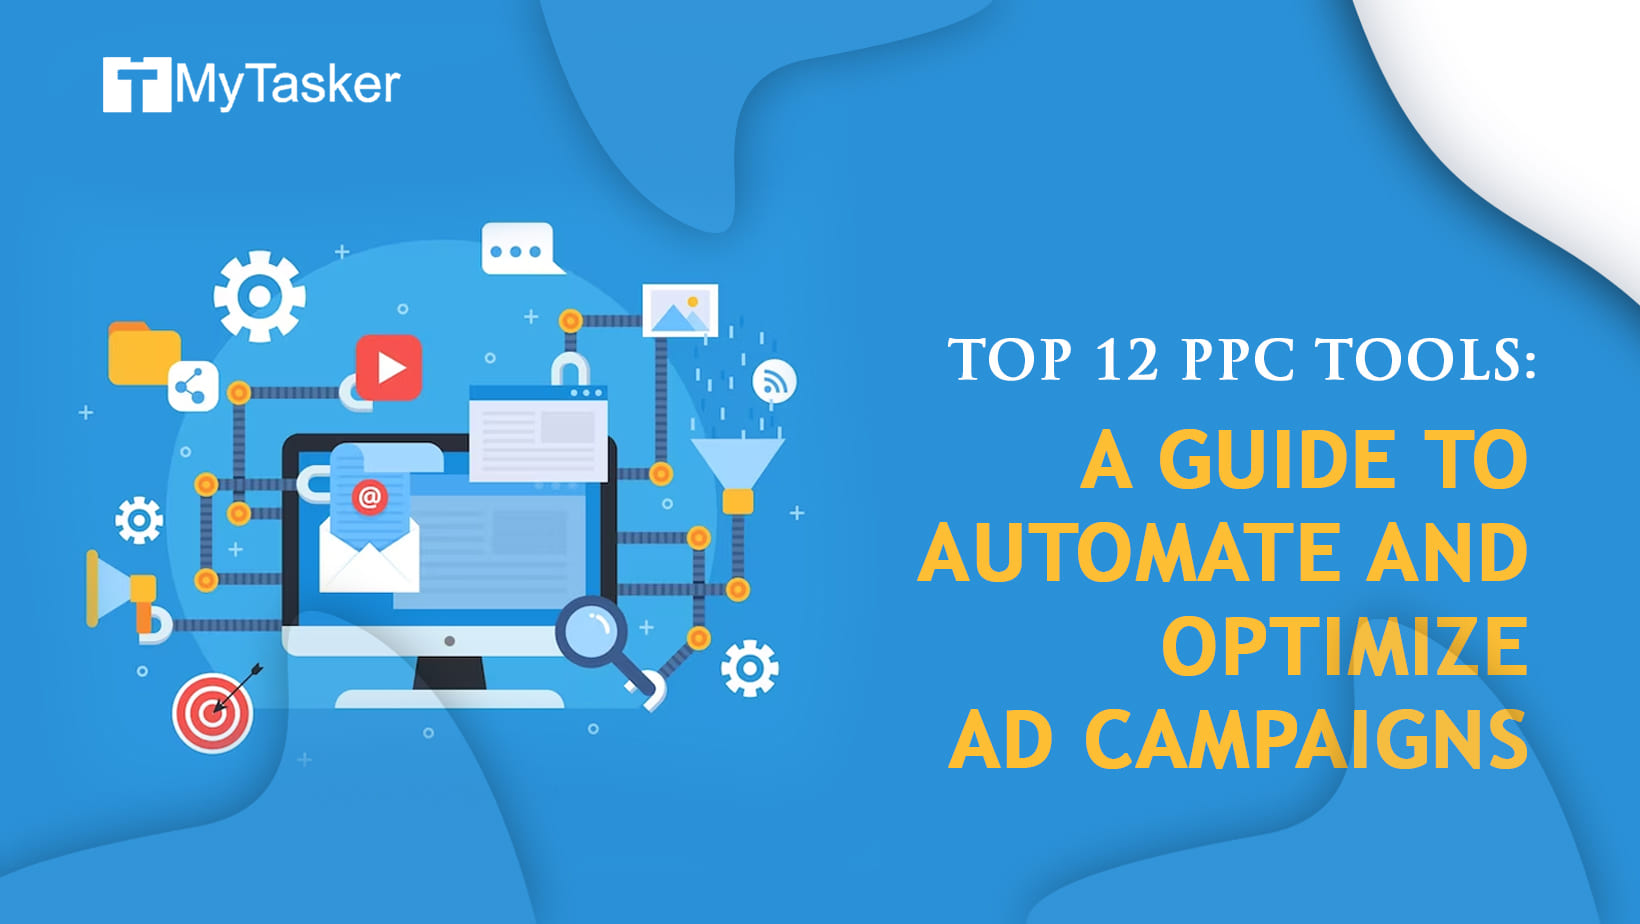 Top 12 PPC Tools: A Guide To Automate and Optimize Ad Campaigns 